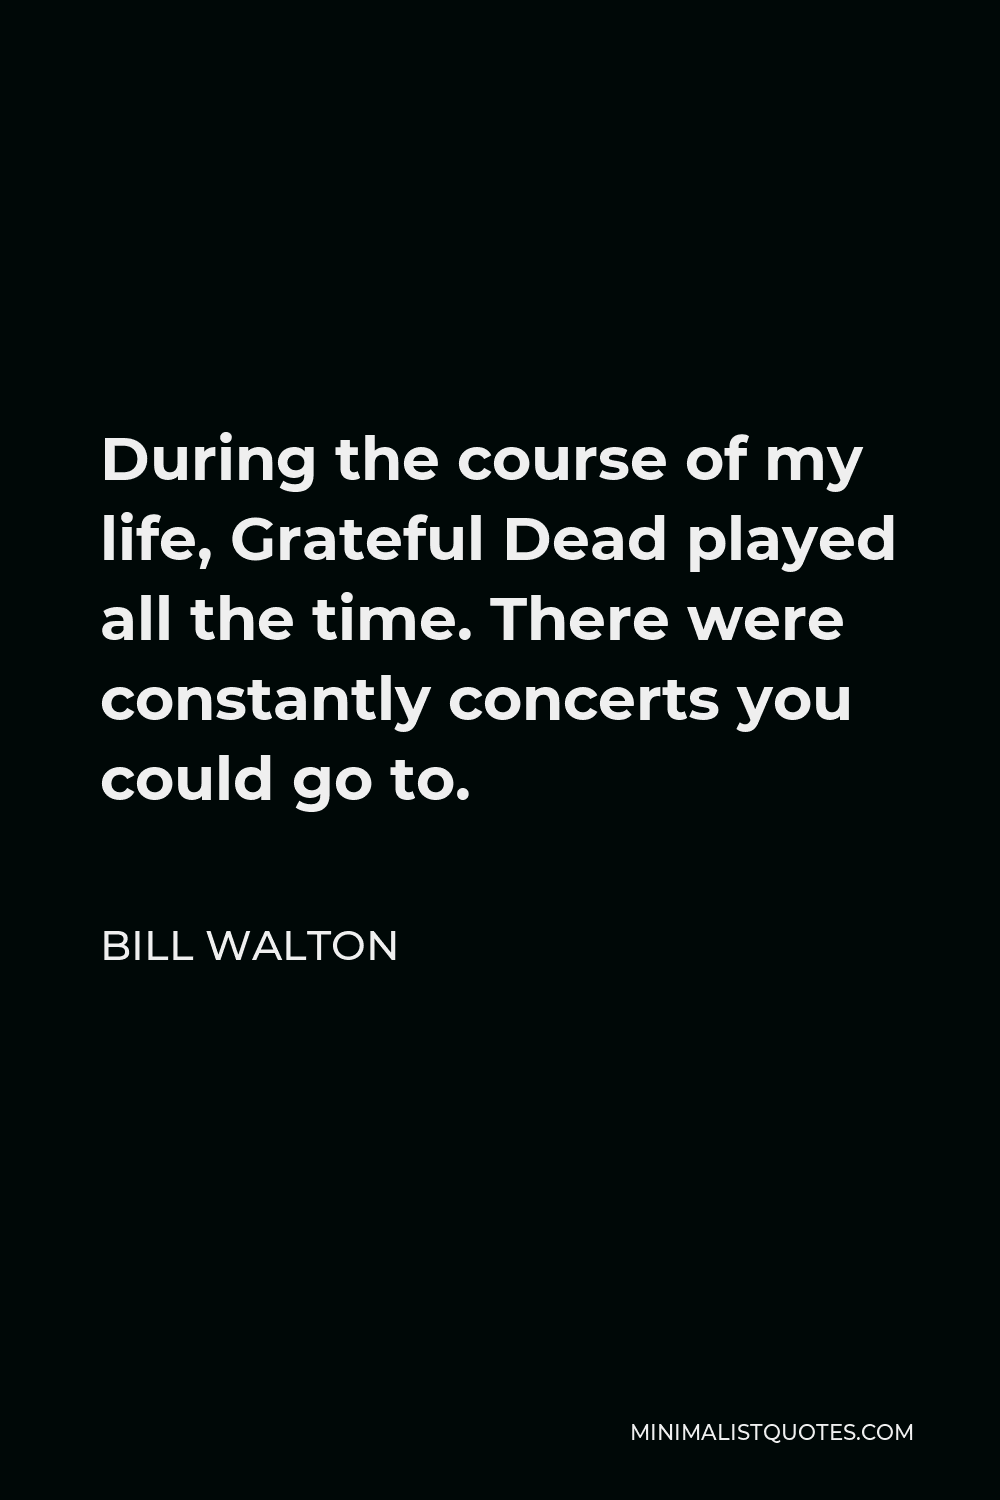 Bill Walton Quote - During the course of my life, Grateful Dead played all the time. There were constantly concerts you could go to.